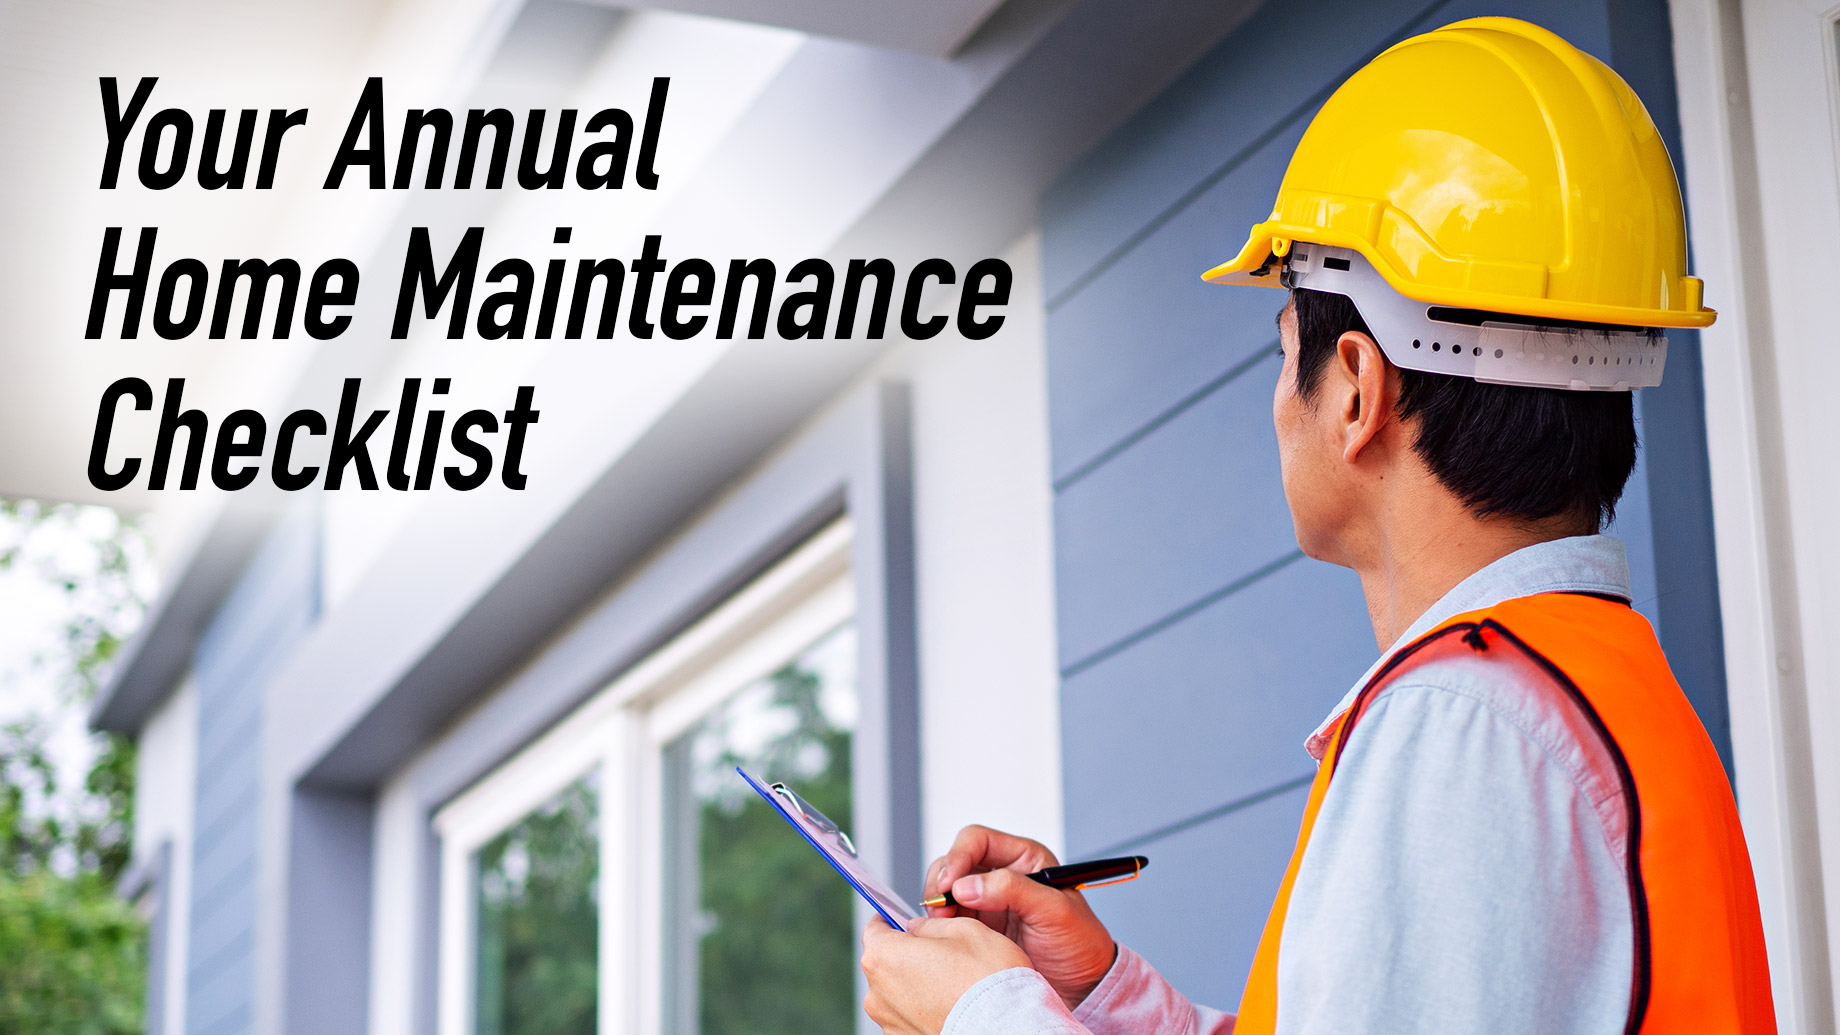 Your Annual Home Maintenance Checklist